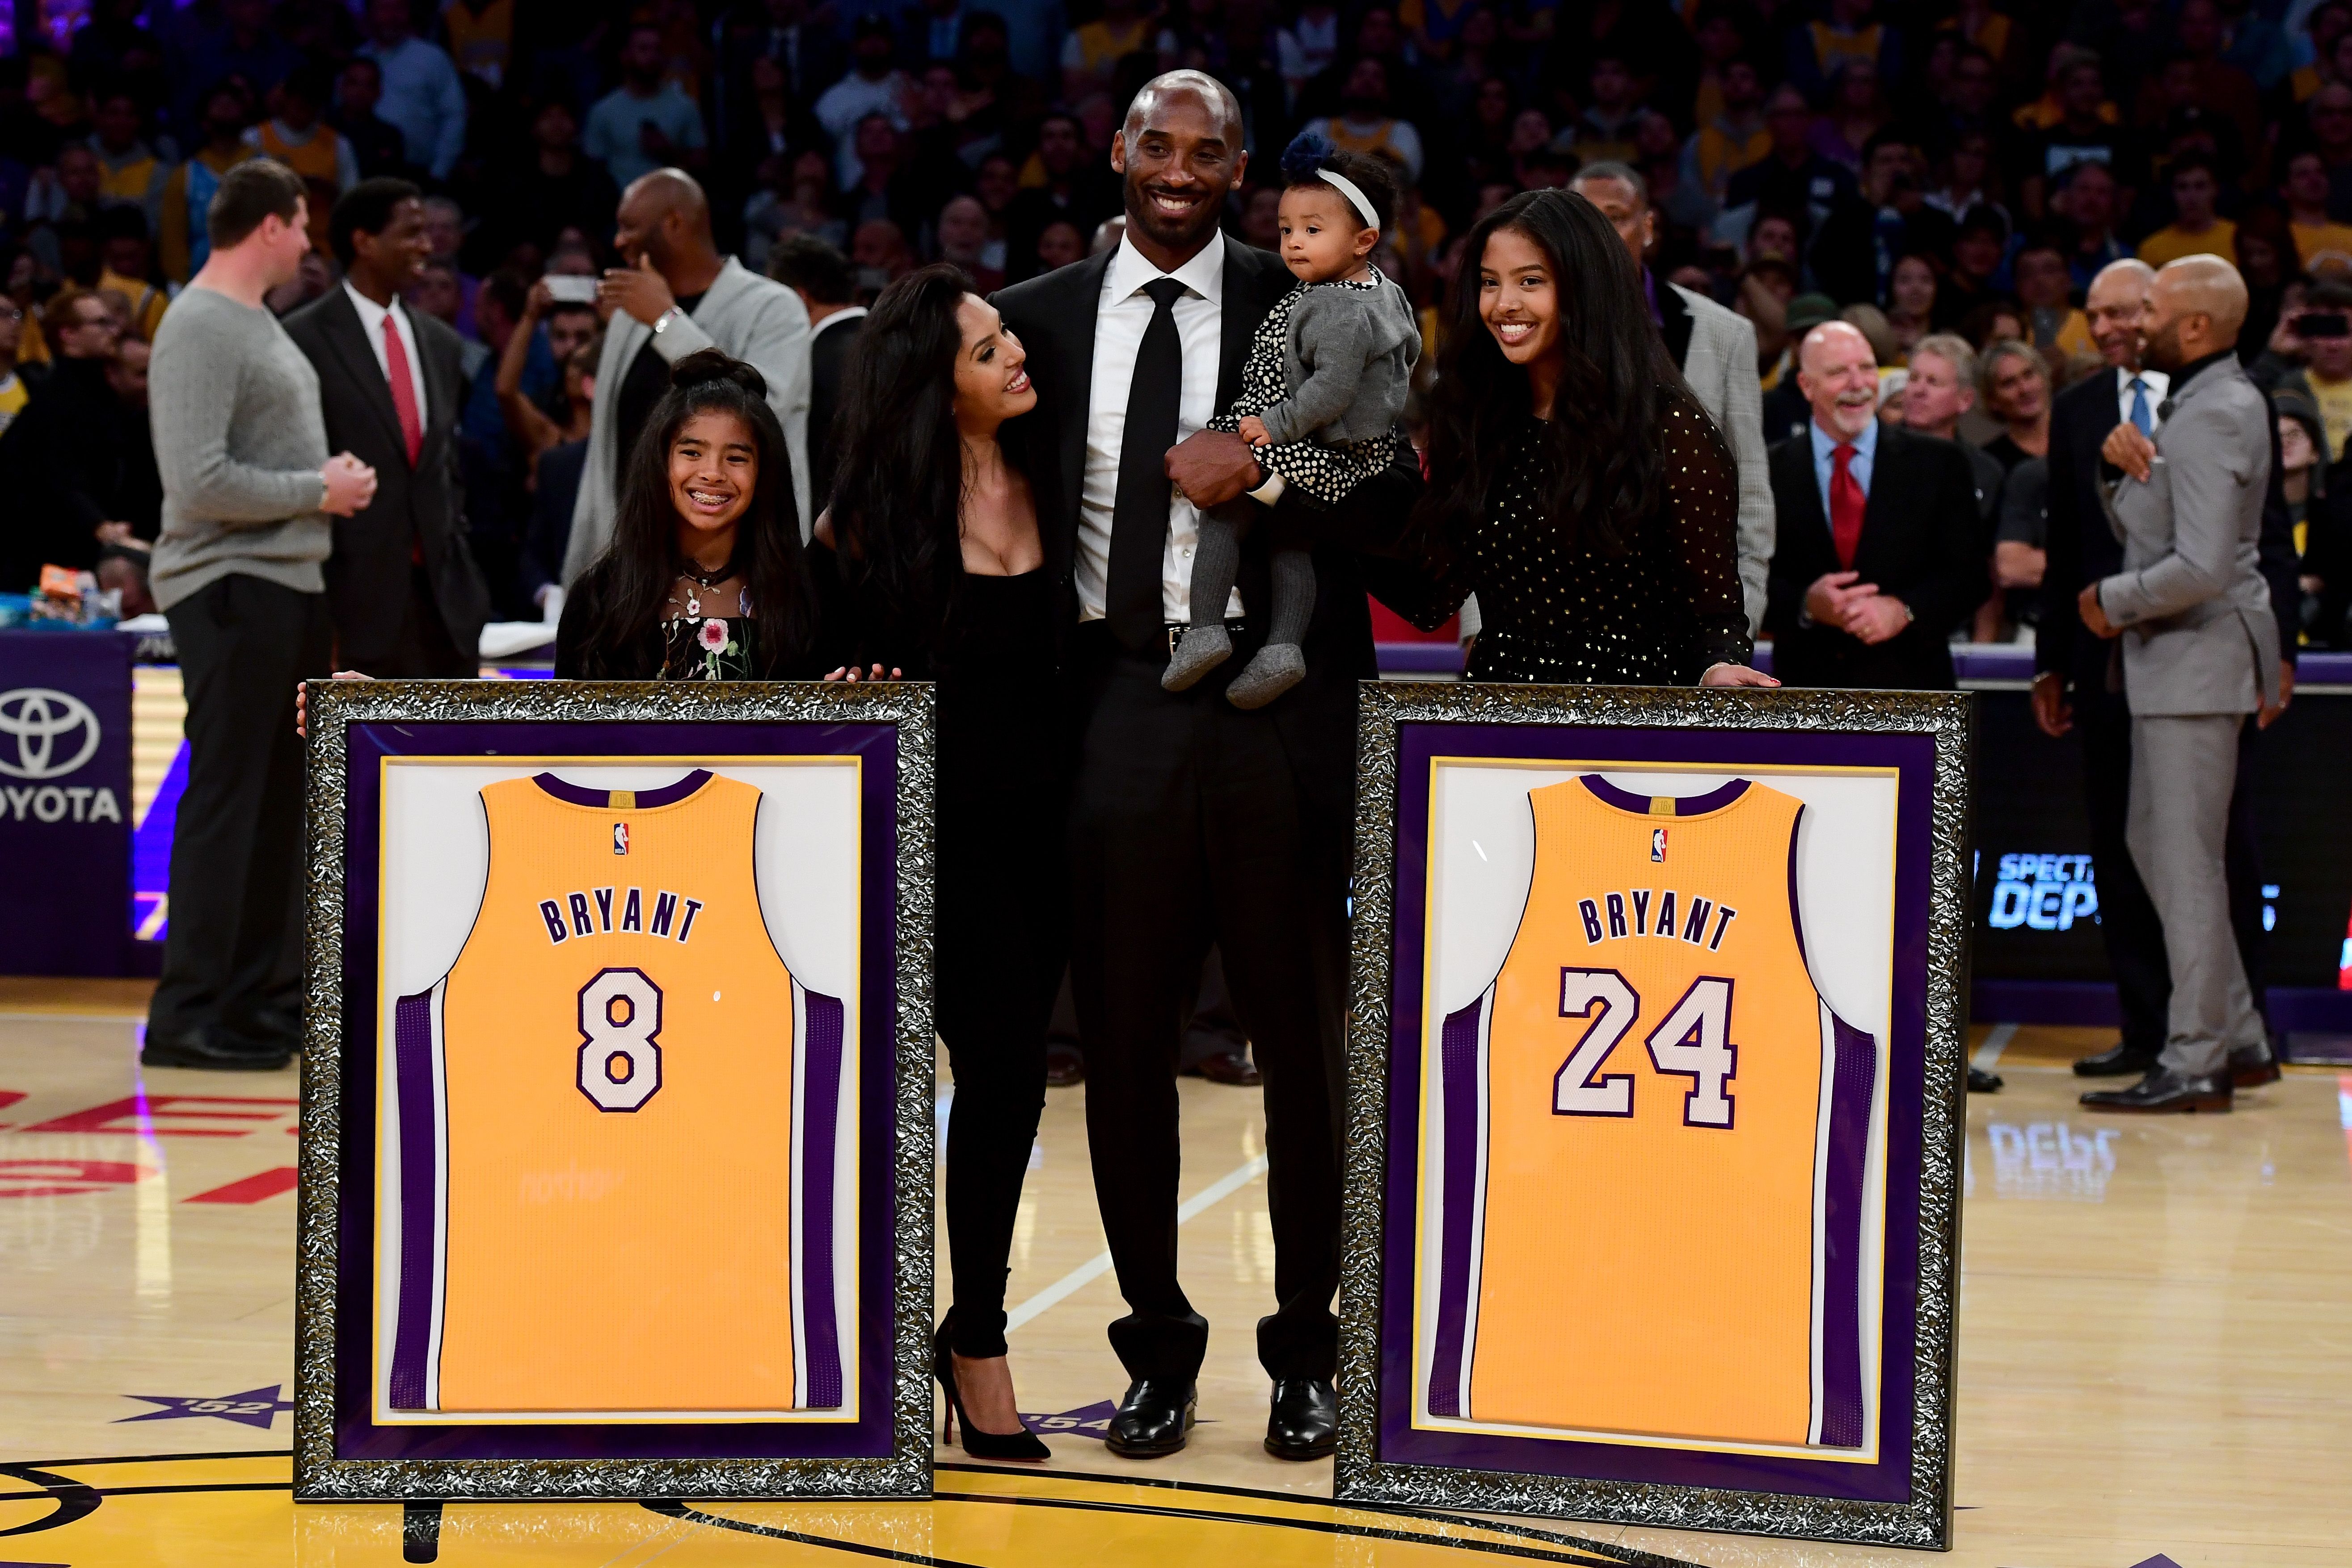 Kobe Bryant poses with his family at halftime after both his #8 and #24 Los Angeles Lakers jerseys are retired at Staples Center on December 18, 2017 in Los Angeles